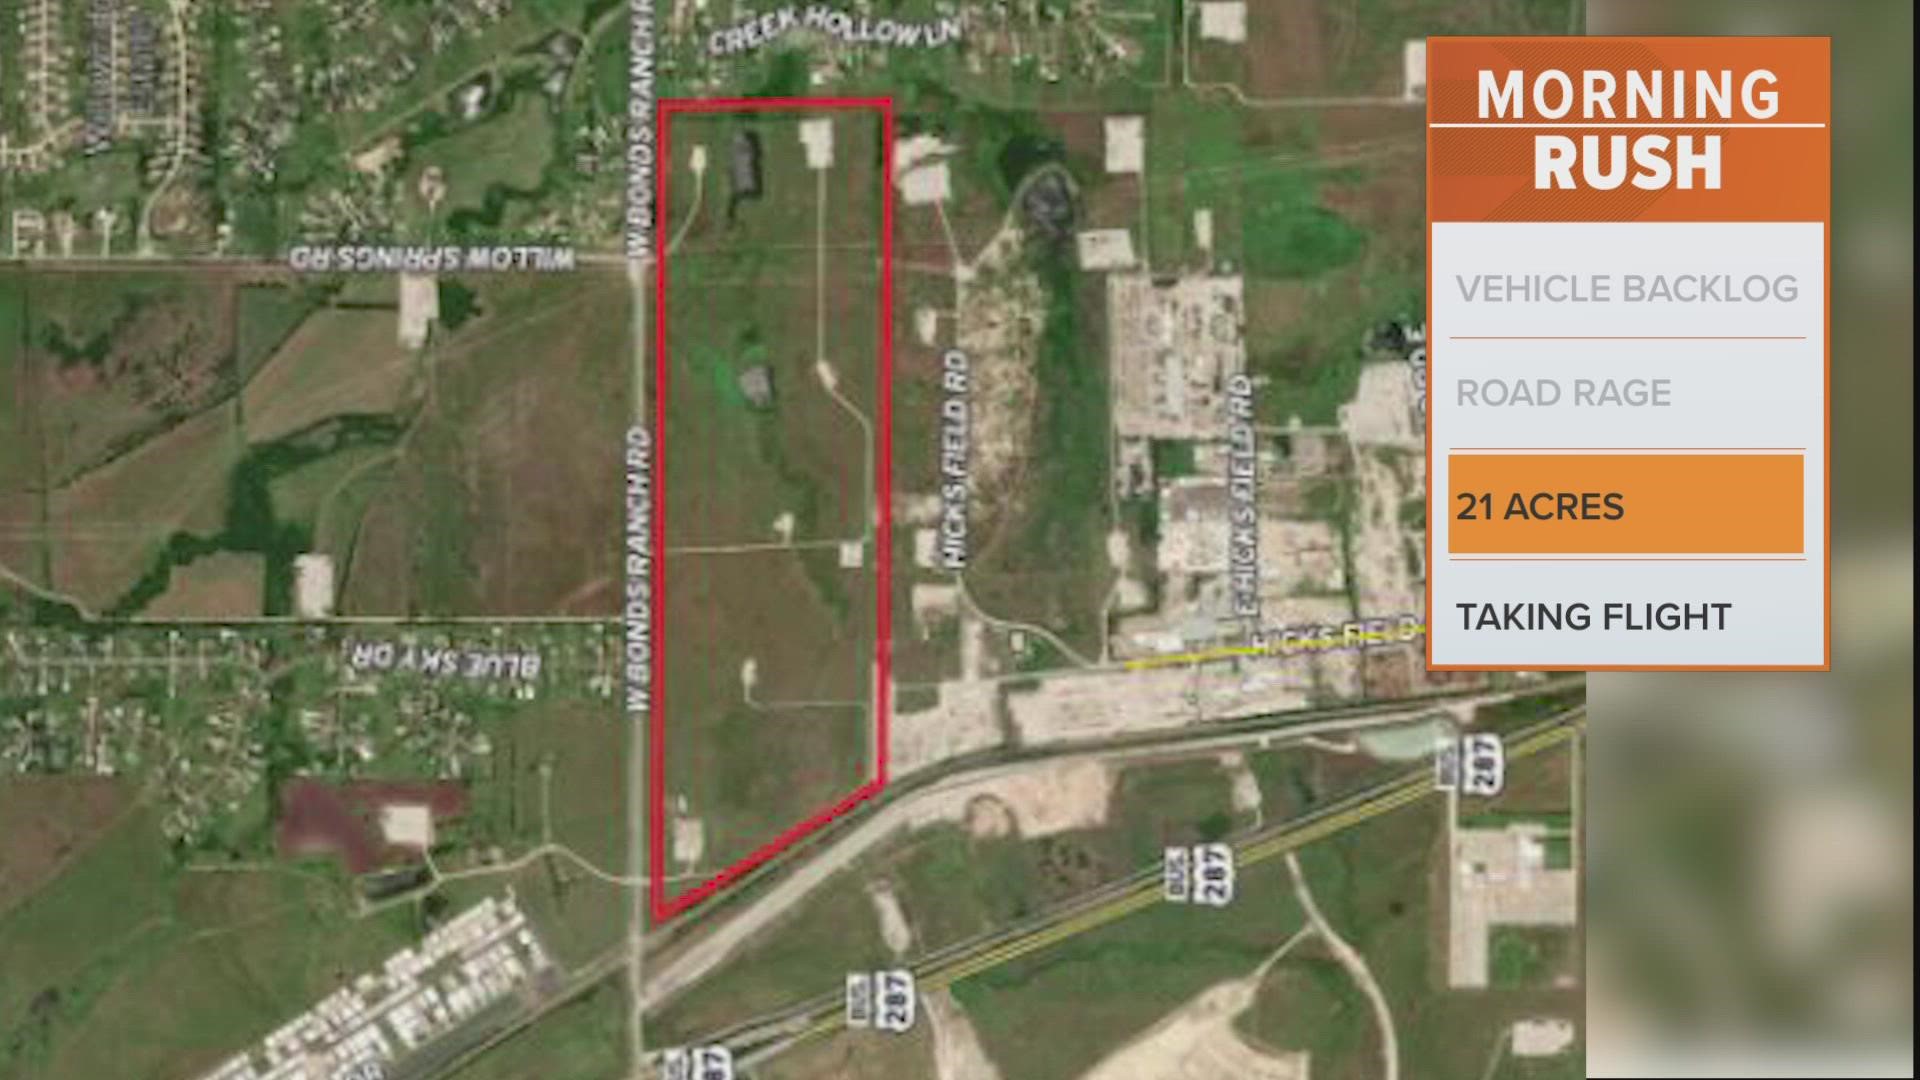 Avon Holdings bought 21 acres for retail space, offices and warehousing.